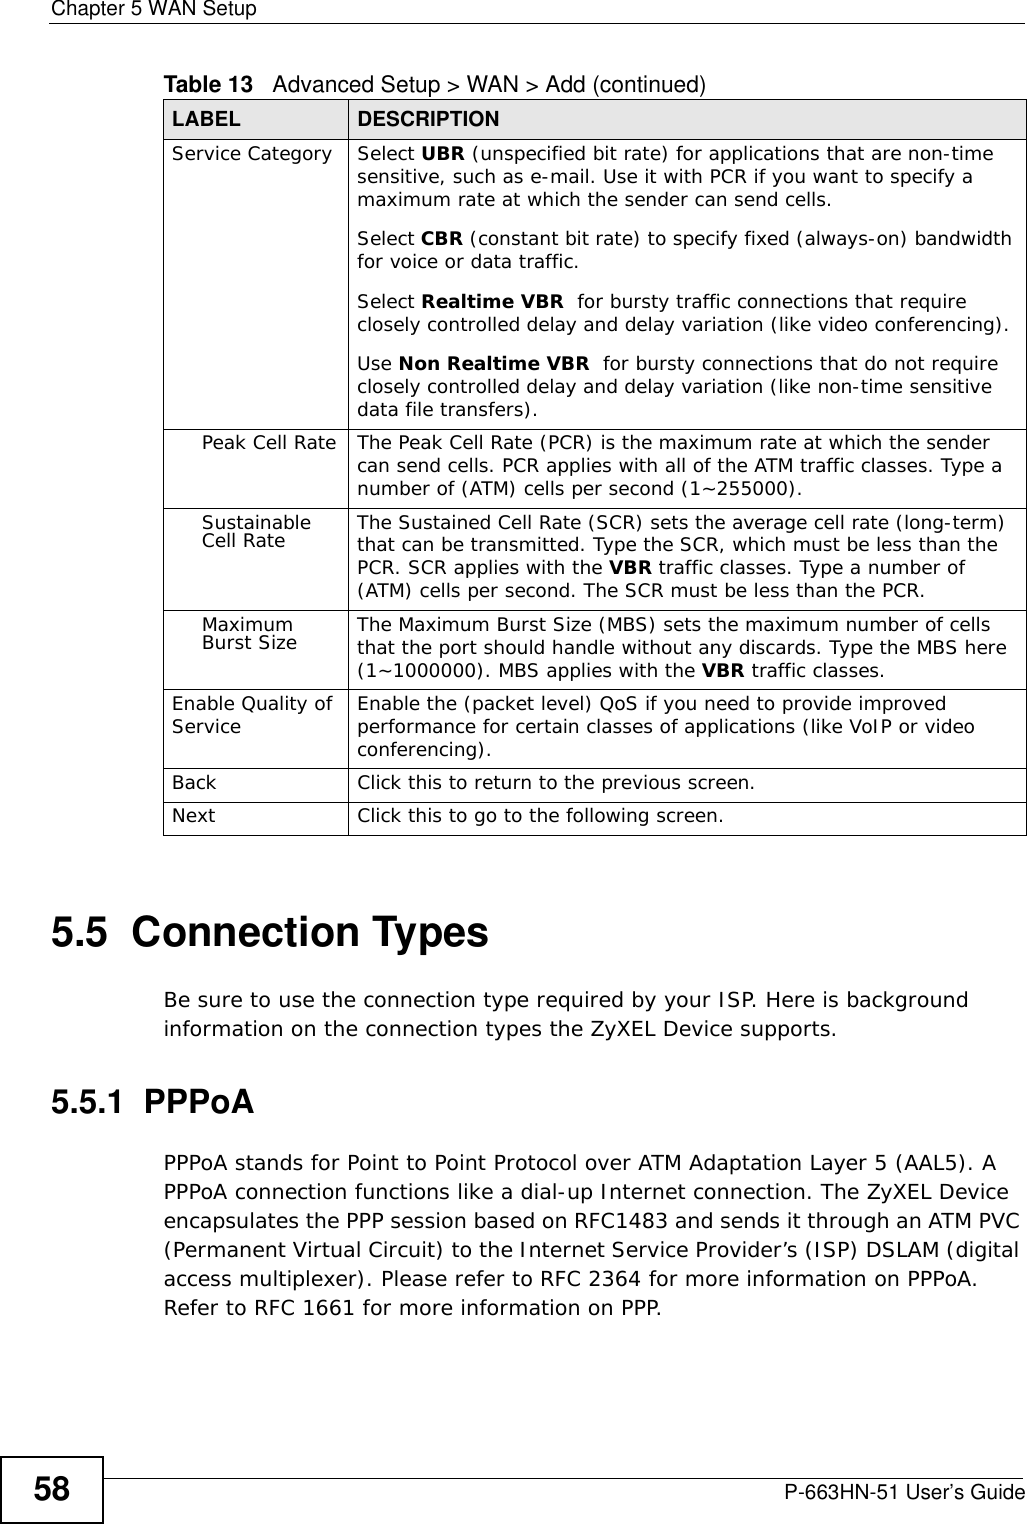 Chapter 5 WAN SetupP-663HN-51 User’s Guide585.5  Connection TypesBe sure to use the connection type required by your ISP. Here is background information on the connection types the ZyXEL Device supports.5.5.1  PPPoAPPPoA stands for Point to Point Protocol over ATM Adaptation Layer 5 (AAL5). A PPPoA connection functions like a dial-up Internet connection. The ZyXEL Device encapsulates the PPP session based on RFC1483 and sends it through an ATM PVC (Permanent Virtual Circuit) to the Internet Service Provider’s (ISP) DSLAM (digital access multiplexer). Please refer to RFC 2364 for more information on PPPoA. Refer to RFC 1661 for more information on PPP.Service Category Select UBR (unspecified bit rate) for applications that are non-time sensitive, such as e-mail. Use it with PCR if you want to specify a maximum rate at which the sender can send cells.Select CBR (constant bit rate) to specify fixed (always-on) bandwidth for voice or data traffic. Select Realtime VBR  for bursty traffic connections that require closely controlled delay and delay variation (like video conferencing). Use Non Realtime VBR  for bursty connections that do not require closely controlled delay and delay variation (like non-time sensitive data file transfers).Peak Cell Rate The Peak Cell Rate (PCR) is the maximum rate at which the sender can send cells. PCR applies with all of the ATM traffic classes. Type a number of (ATM) cells per second (1~255000).Sustainable Cell Rate The Sustained Cell Rate (SCR) sets the average cell rate (long-term) that can be transmitted. Type the SCR, which must be less than the PCR. SCR applies with the VBR traffic classes. Type a number of (ATM) cells per second. The SCR must be less than the PCR.Maximum Burst Size The Maximum Burst Size (MBS) sets the maximum number of cells that the port should handle without any discards. Type the MBS here (1~1000000). MBS applies with the VBR traffic classes.Enable Quality of Service Enable the (packet level) QoS if you need to provide improved performance for certain classes of applications (like VoIP or video conferencing). Back Click this to return to the previous screen.Next Click this to go to the following screen.Table 13   Advanced Setup &gt; WAN &gt; Add (continued)LABEL DESCRIPTION